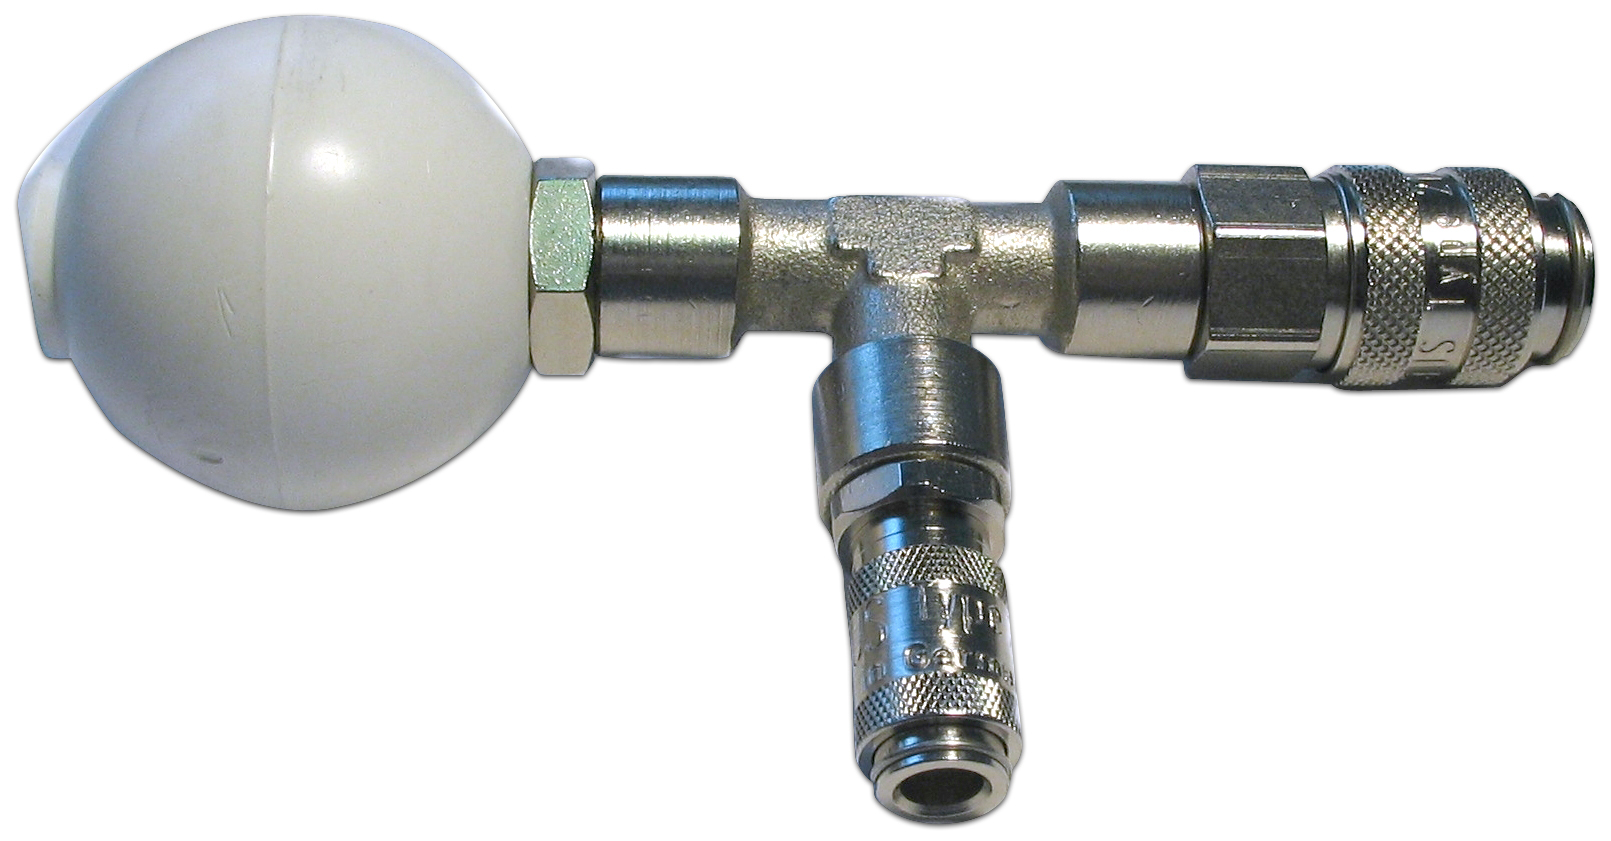 Safety shut valve connector  with sealing ball, flow restrictor + 2 quick-release coupling